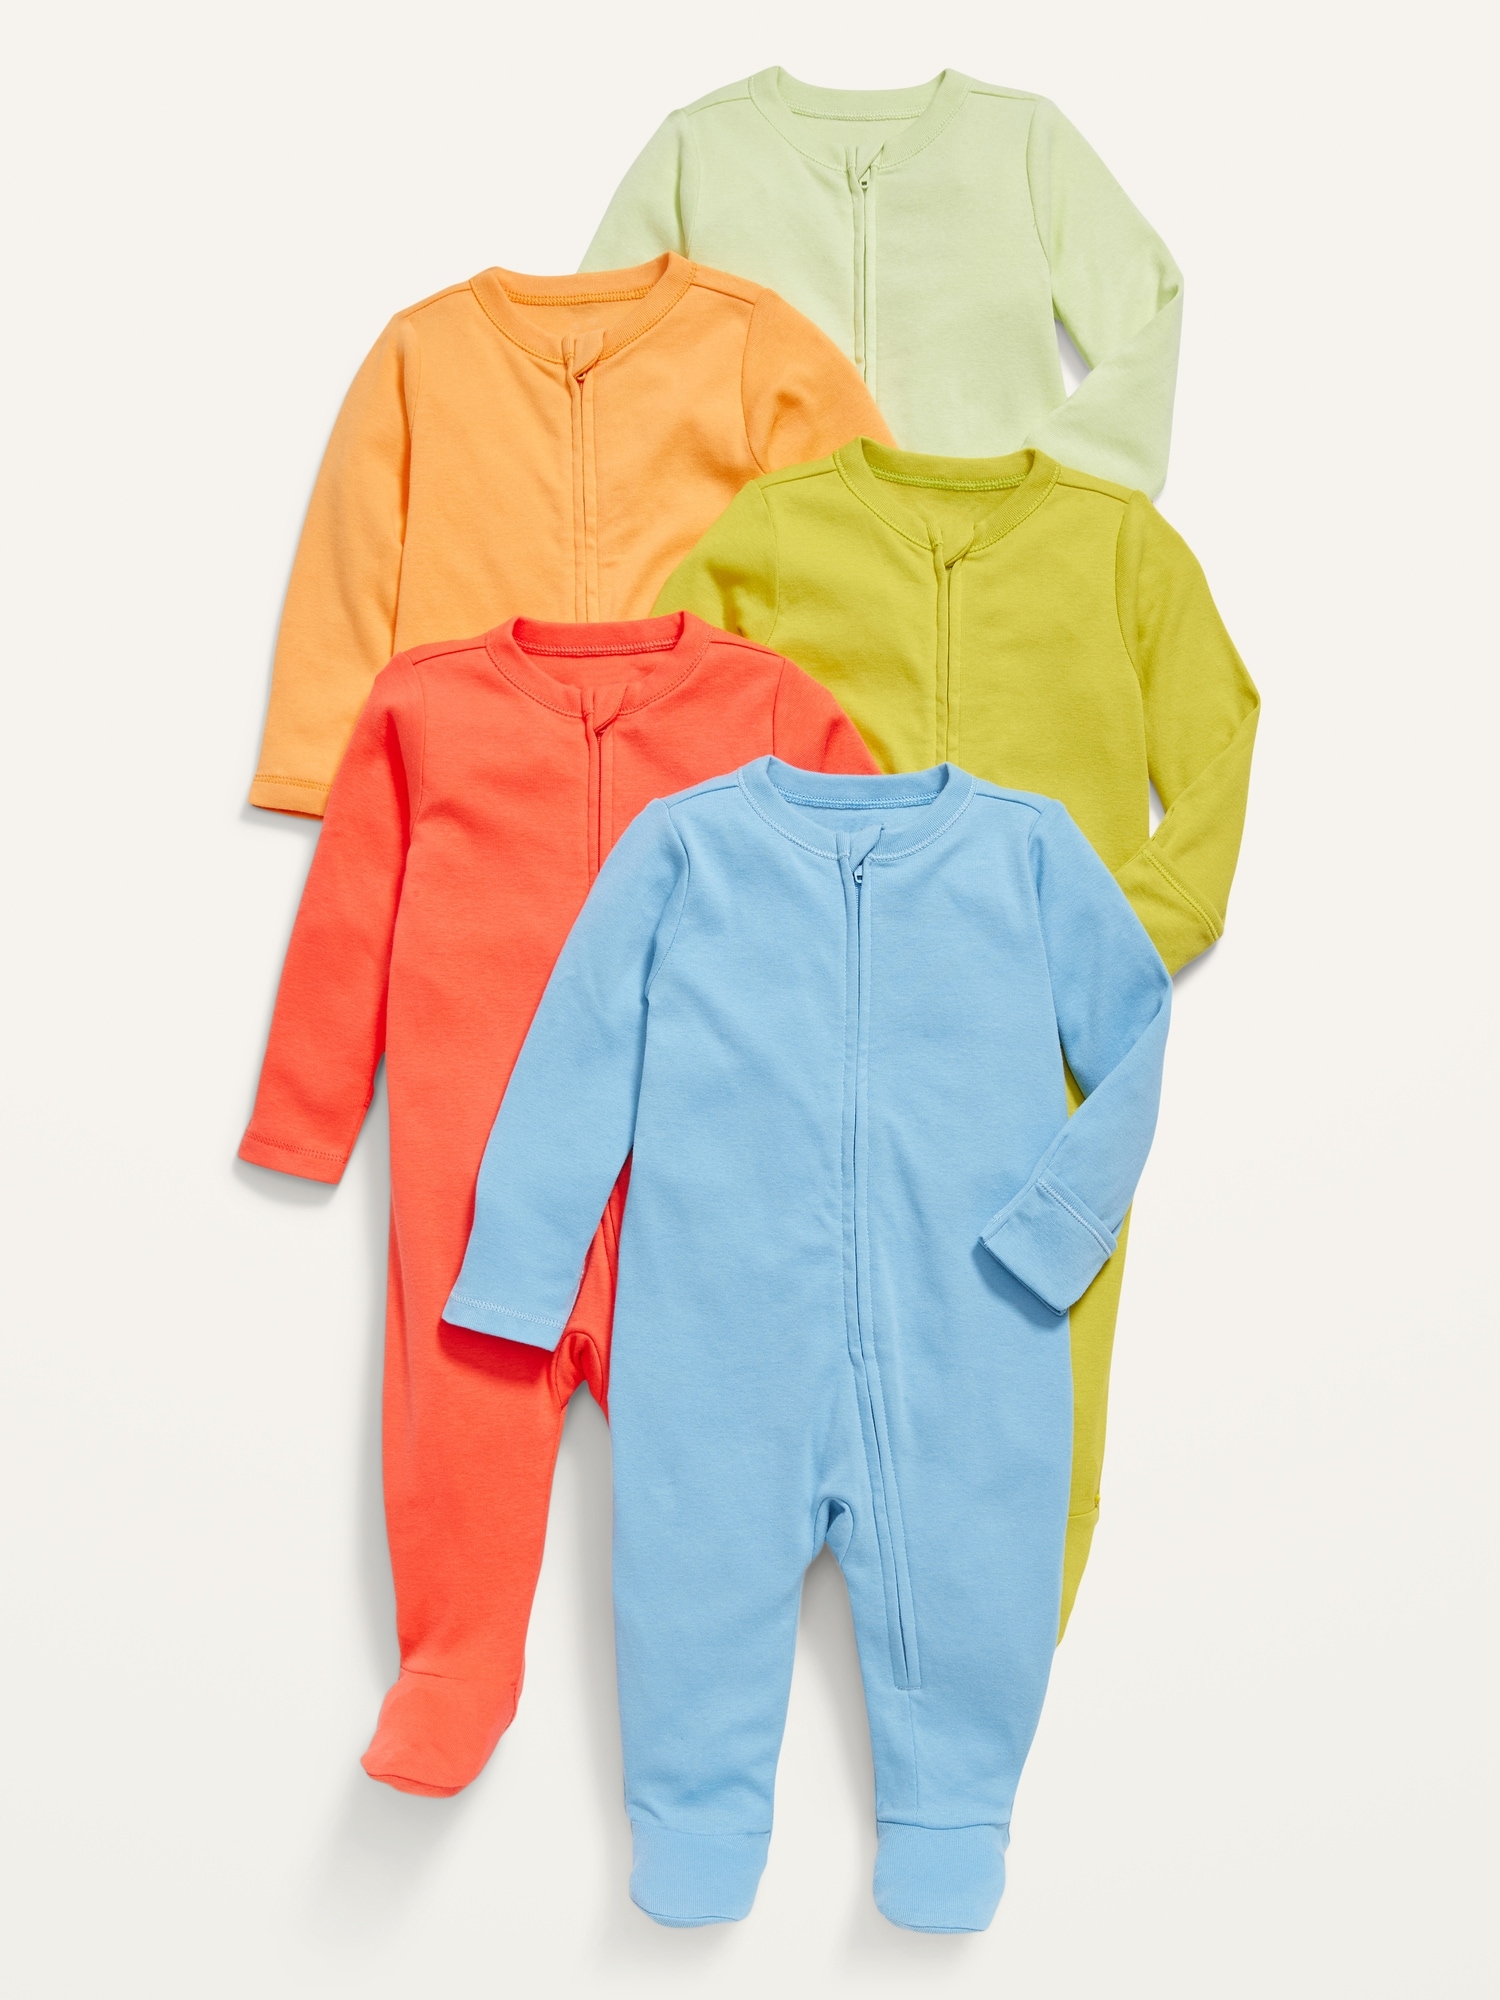 Old Navy Unisex 5-Pack Sleep & Play 1-Way Zip Footed One-Piece for Baby multi. 1